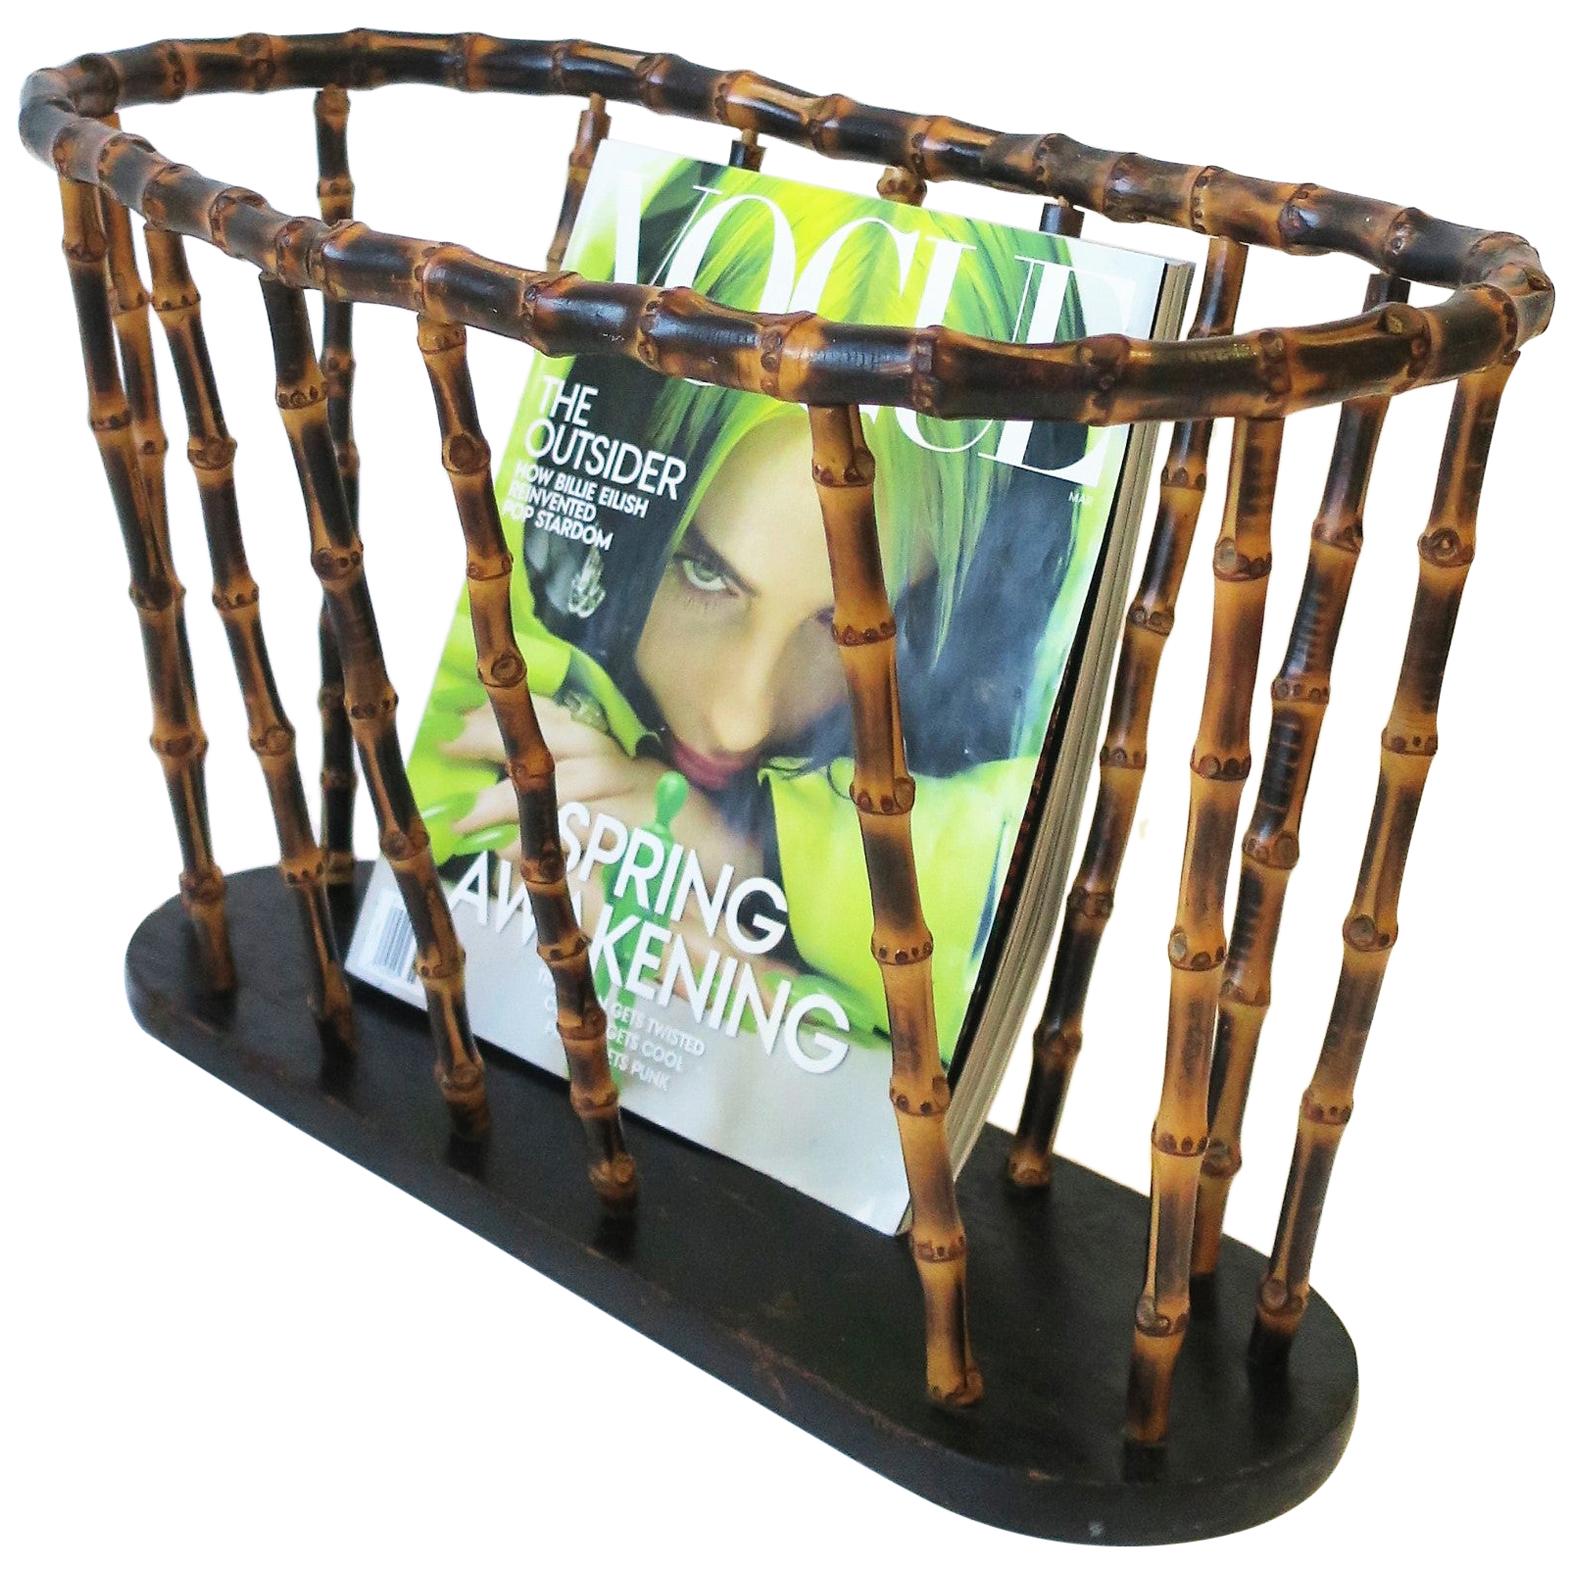 Bamboo Magazine or Newspaper Holder Stand Rack Basket in the style of Gucci